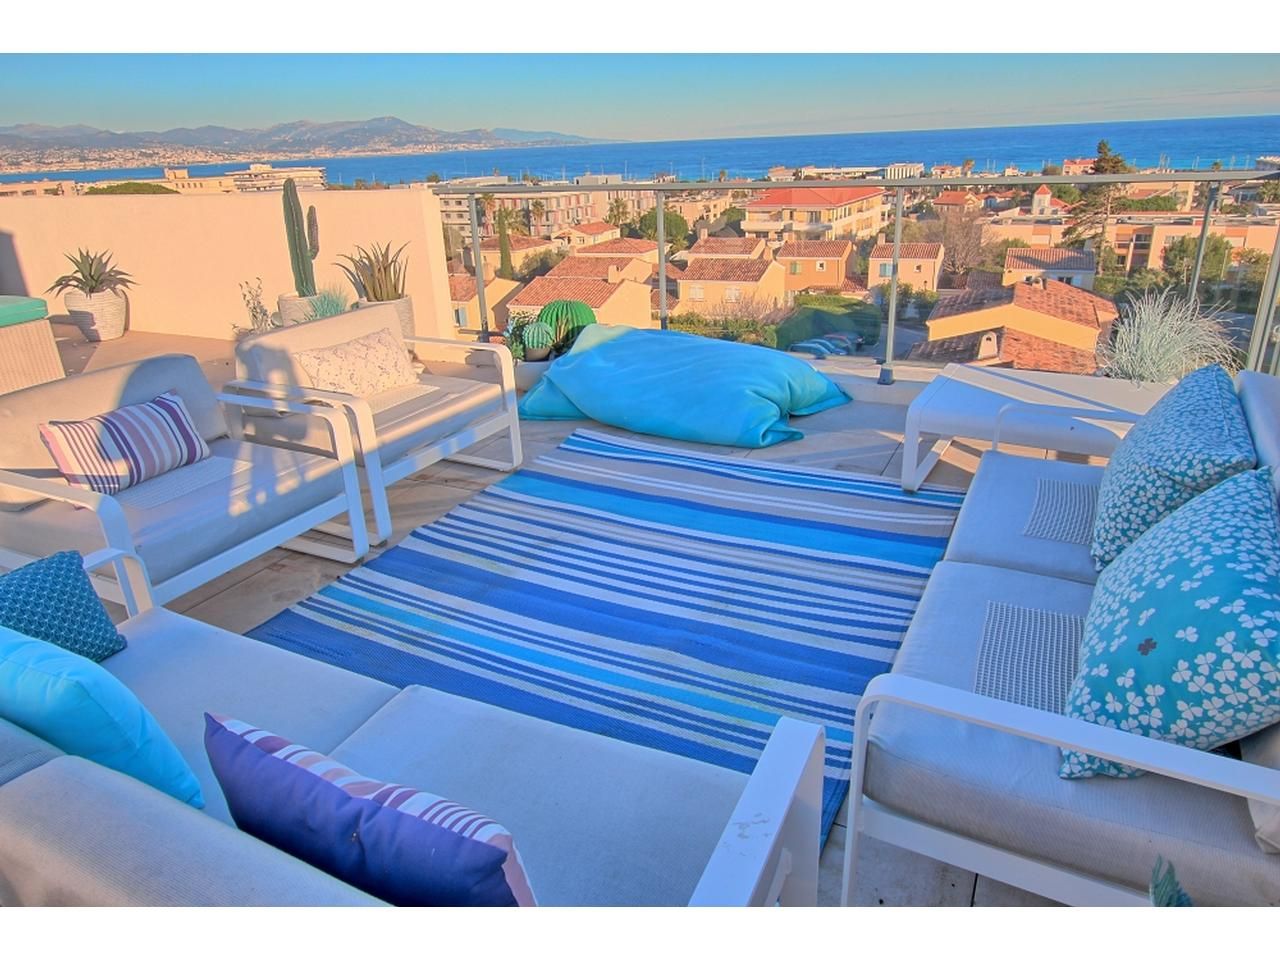 Appartement à Antibes, France, 104 m2 - image 1